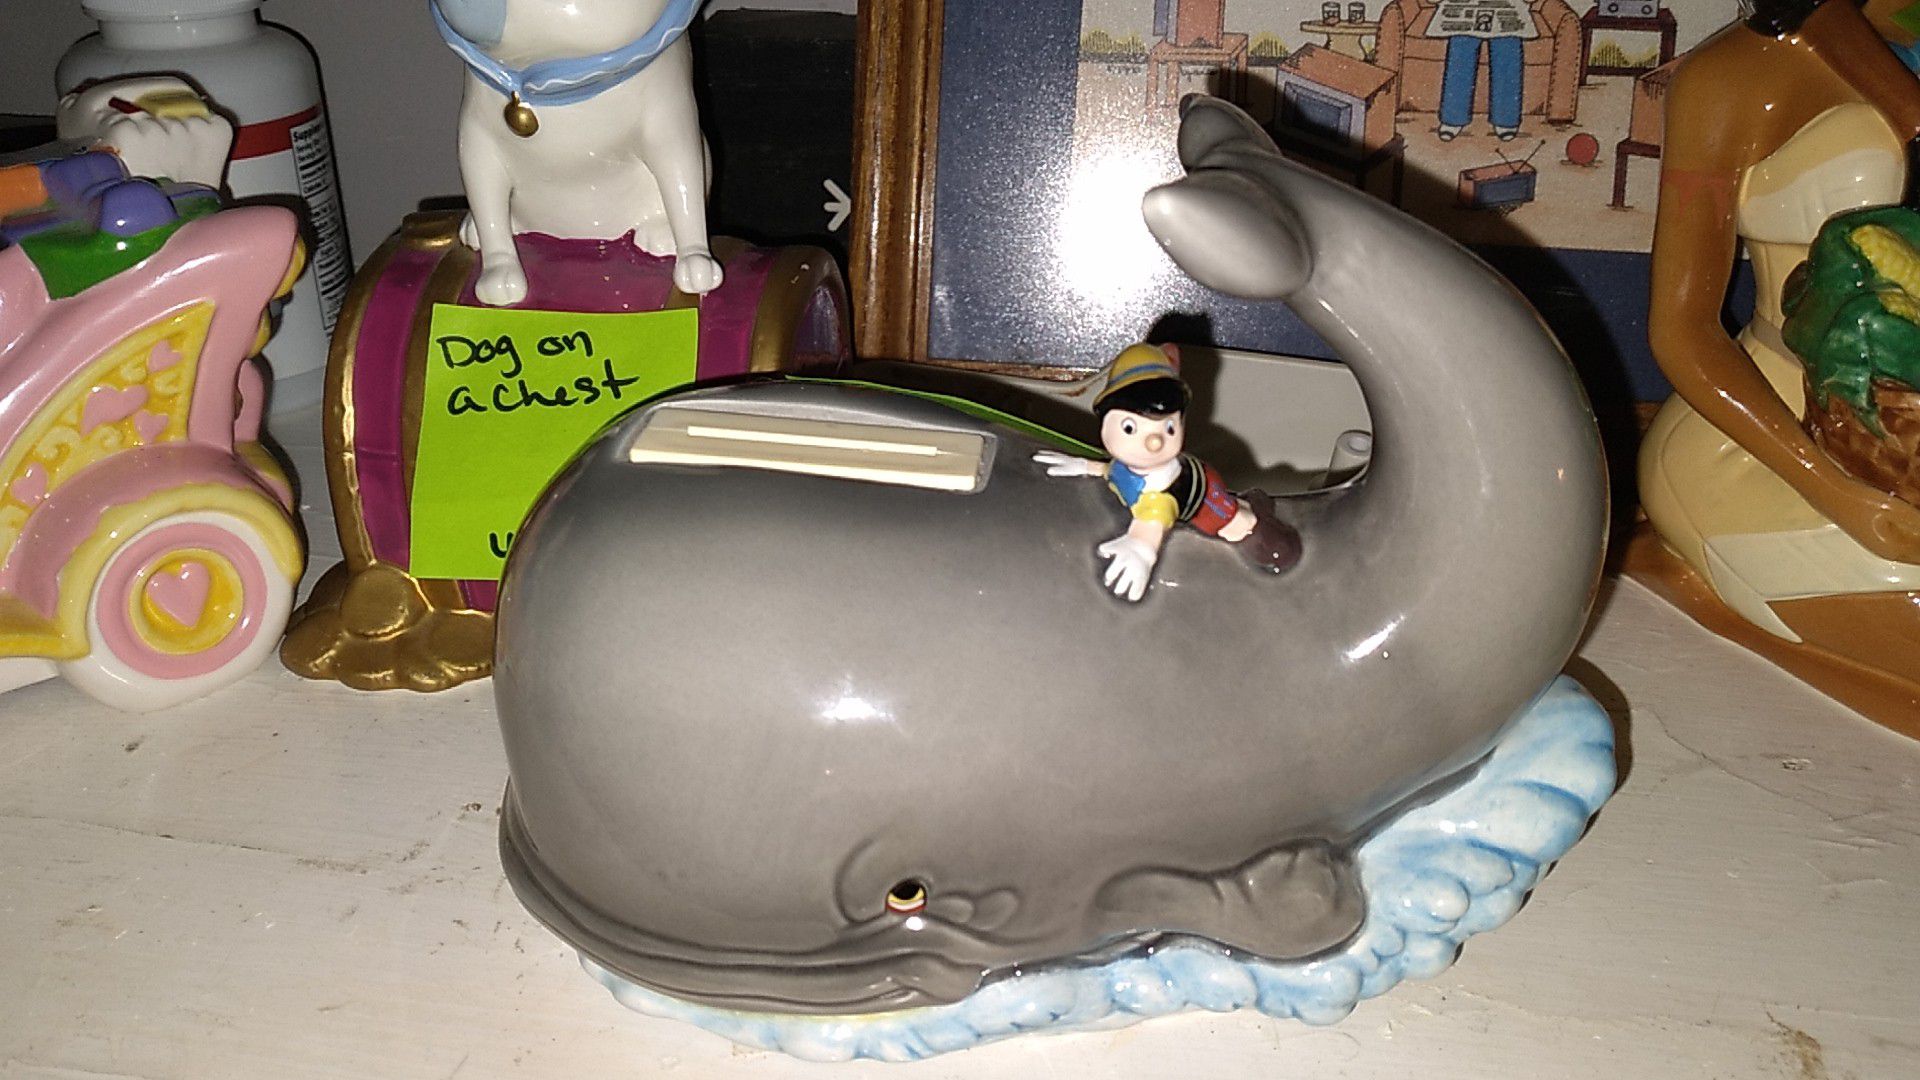 Pinocchio the whale